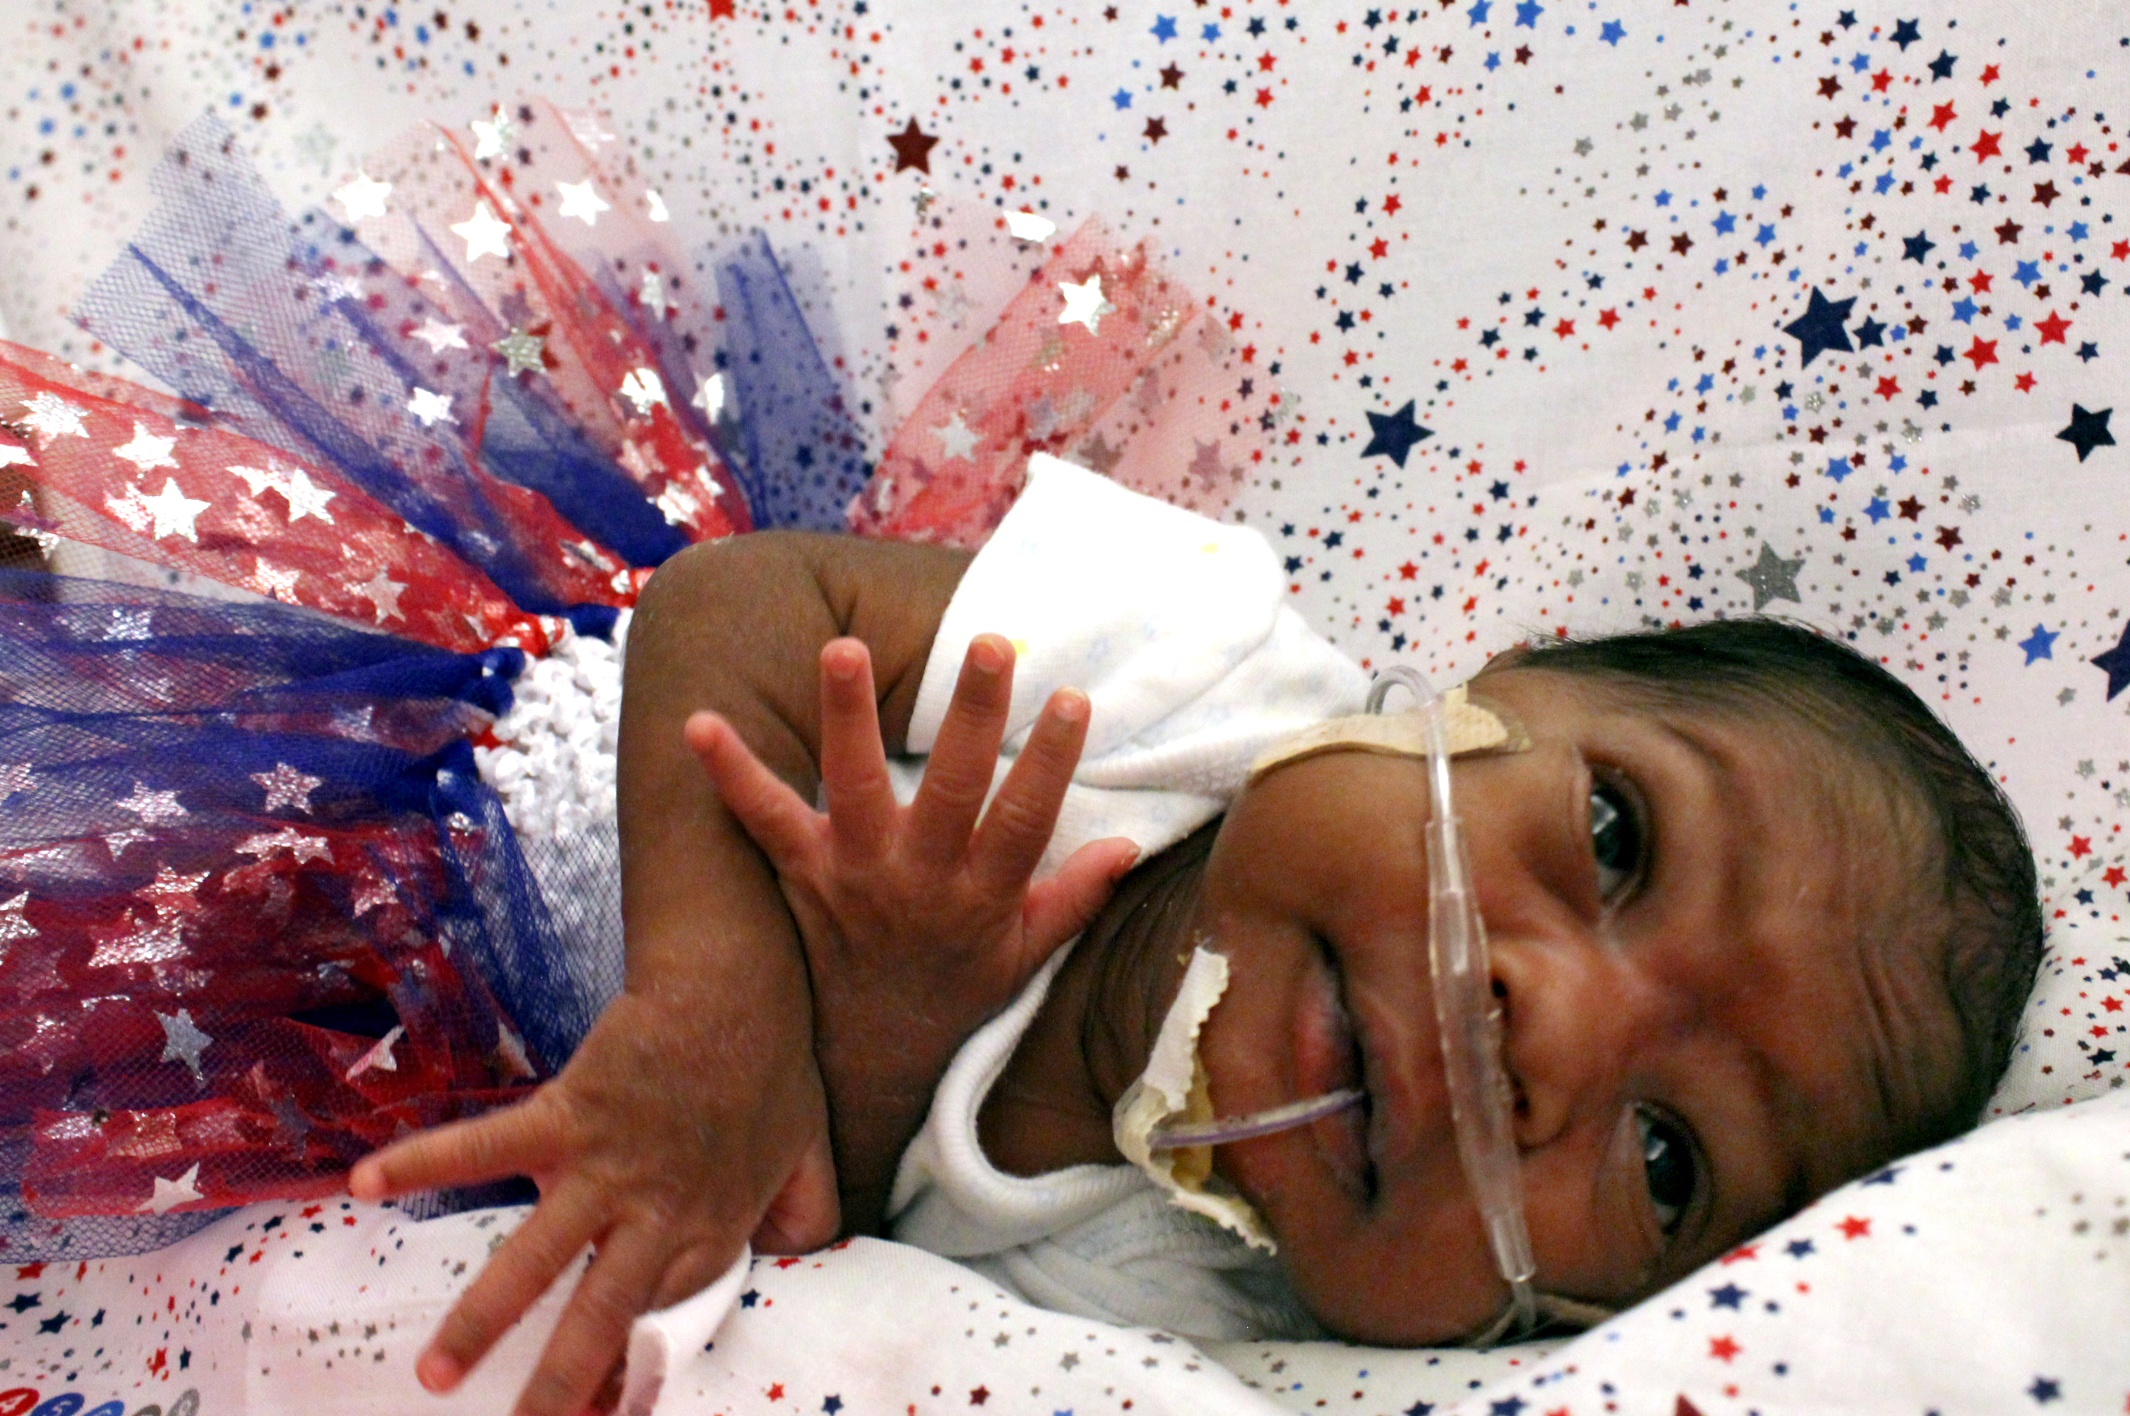 PHOTO: The preemies in the neonatal intensive care unit at the University of Cincinnati Medical Center wore red, white and blue to celebrate the 4th of July.  